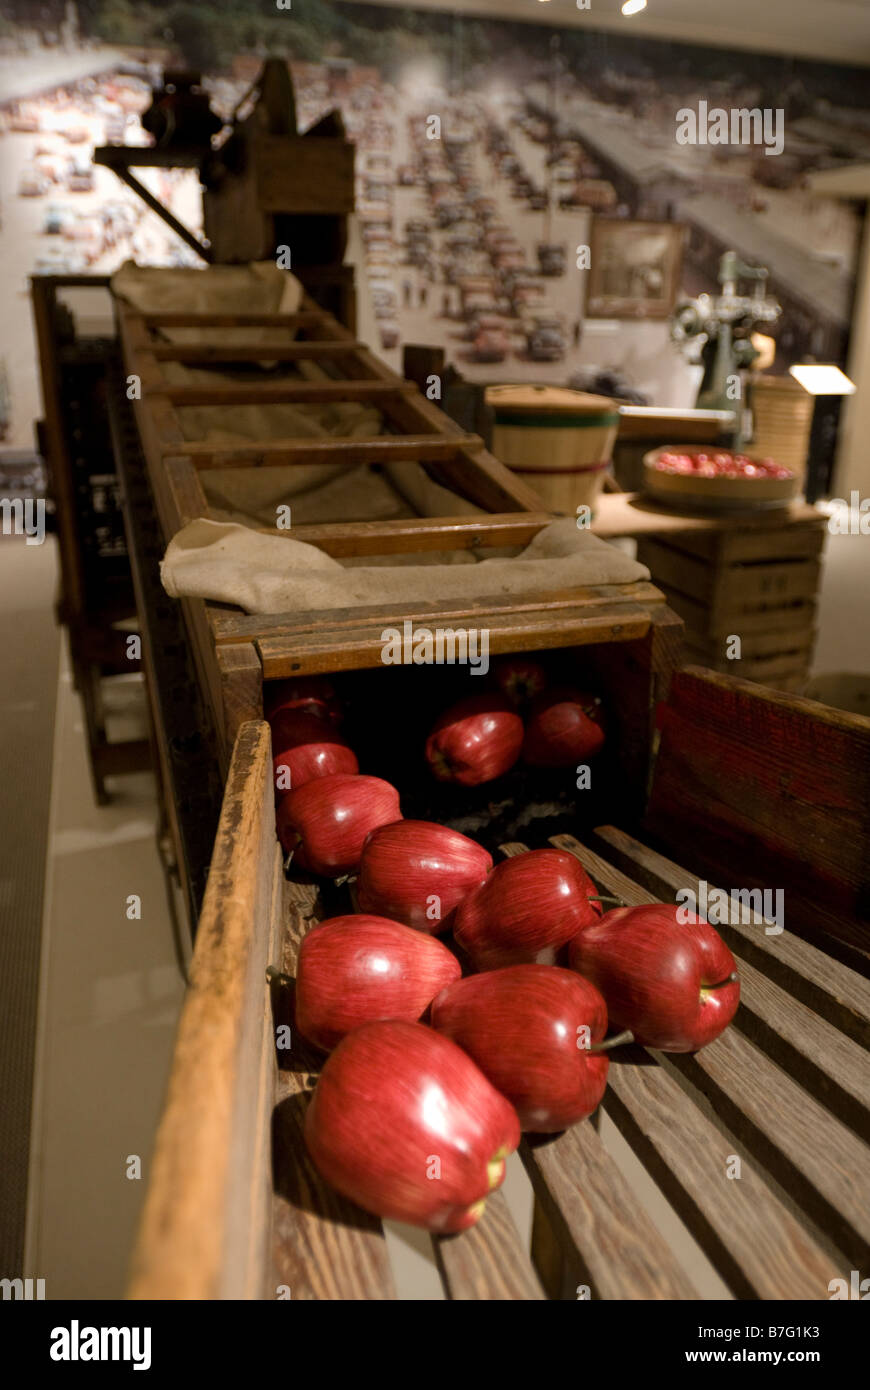 Apple harvesting equipment on display at The Heritage Museum and Cultural Center in St Joseph, Michigan, USA. Stock Photo